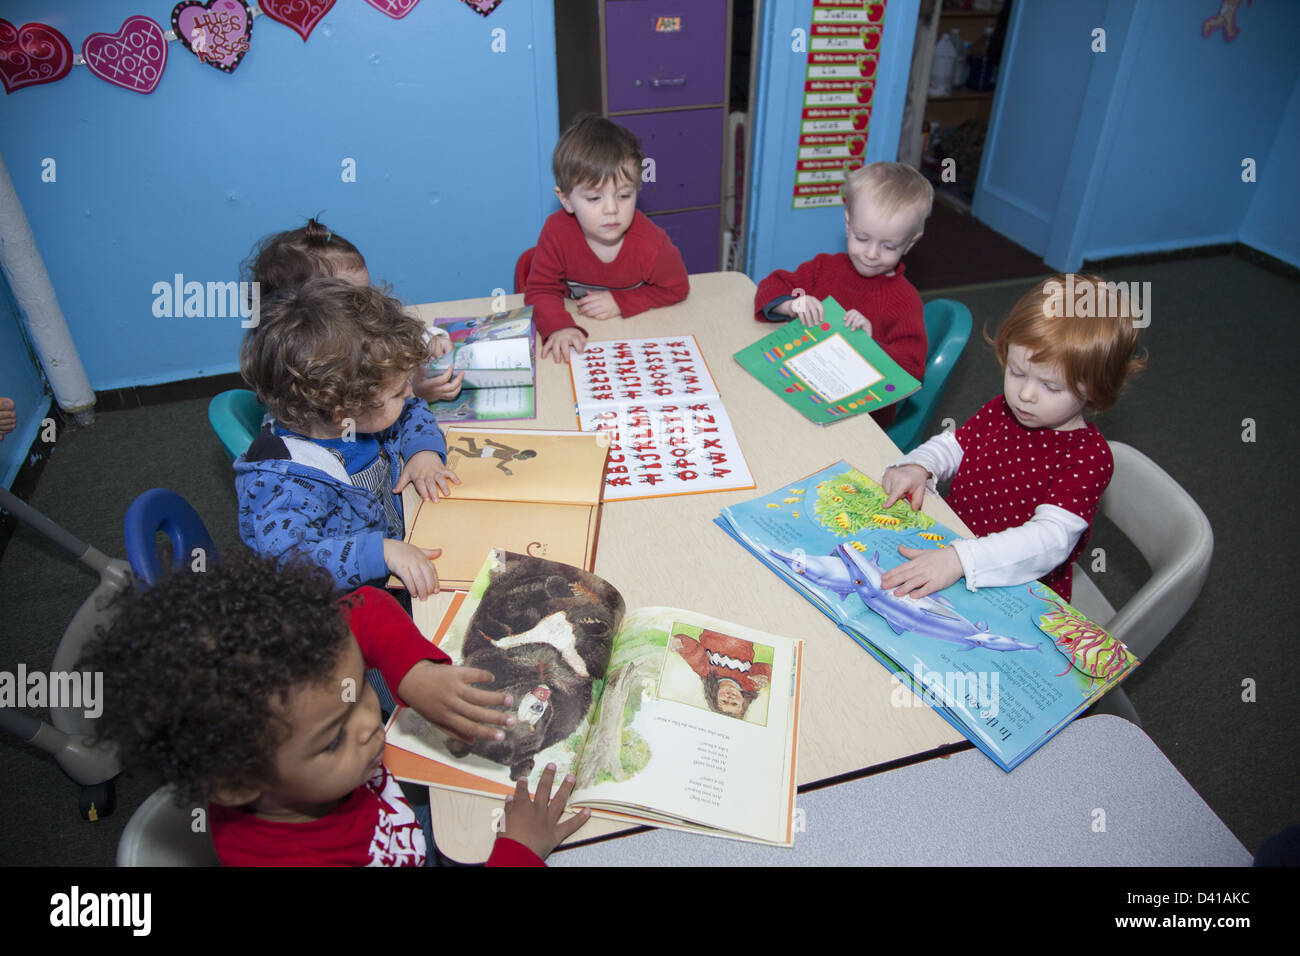 Smart Kids Are Us, a multicultural nursery school and early learning center in Brooklyn, NY. Stock Photo